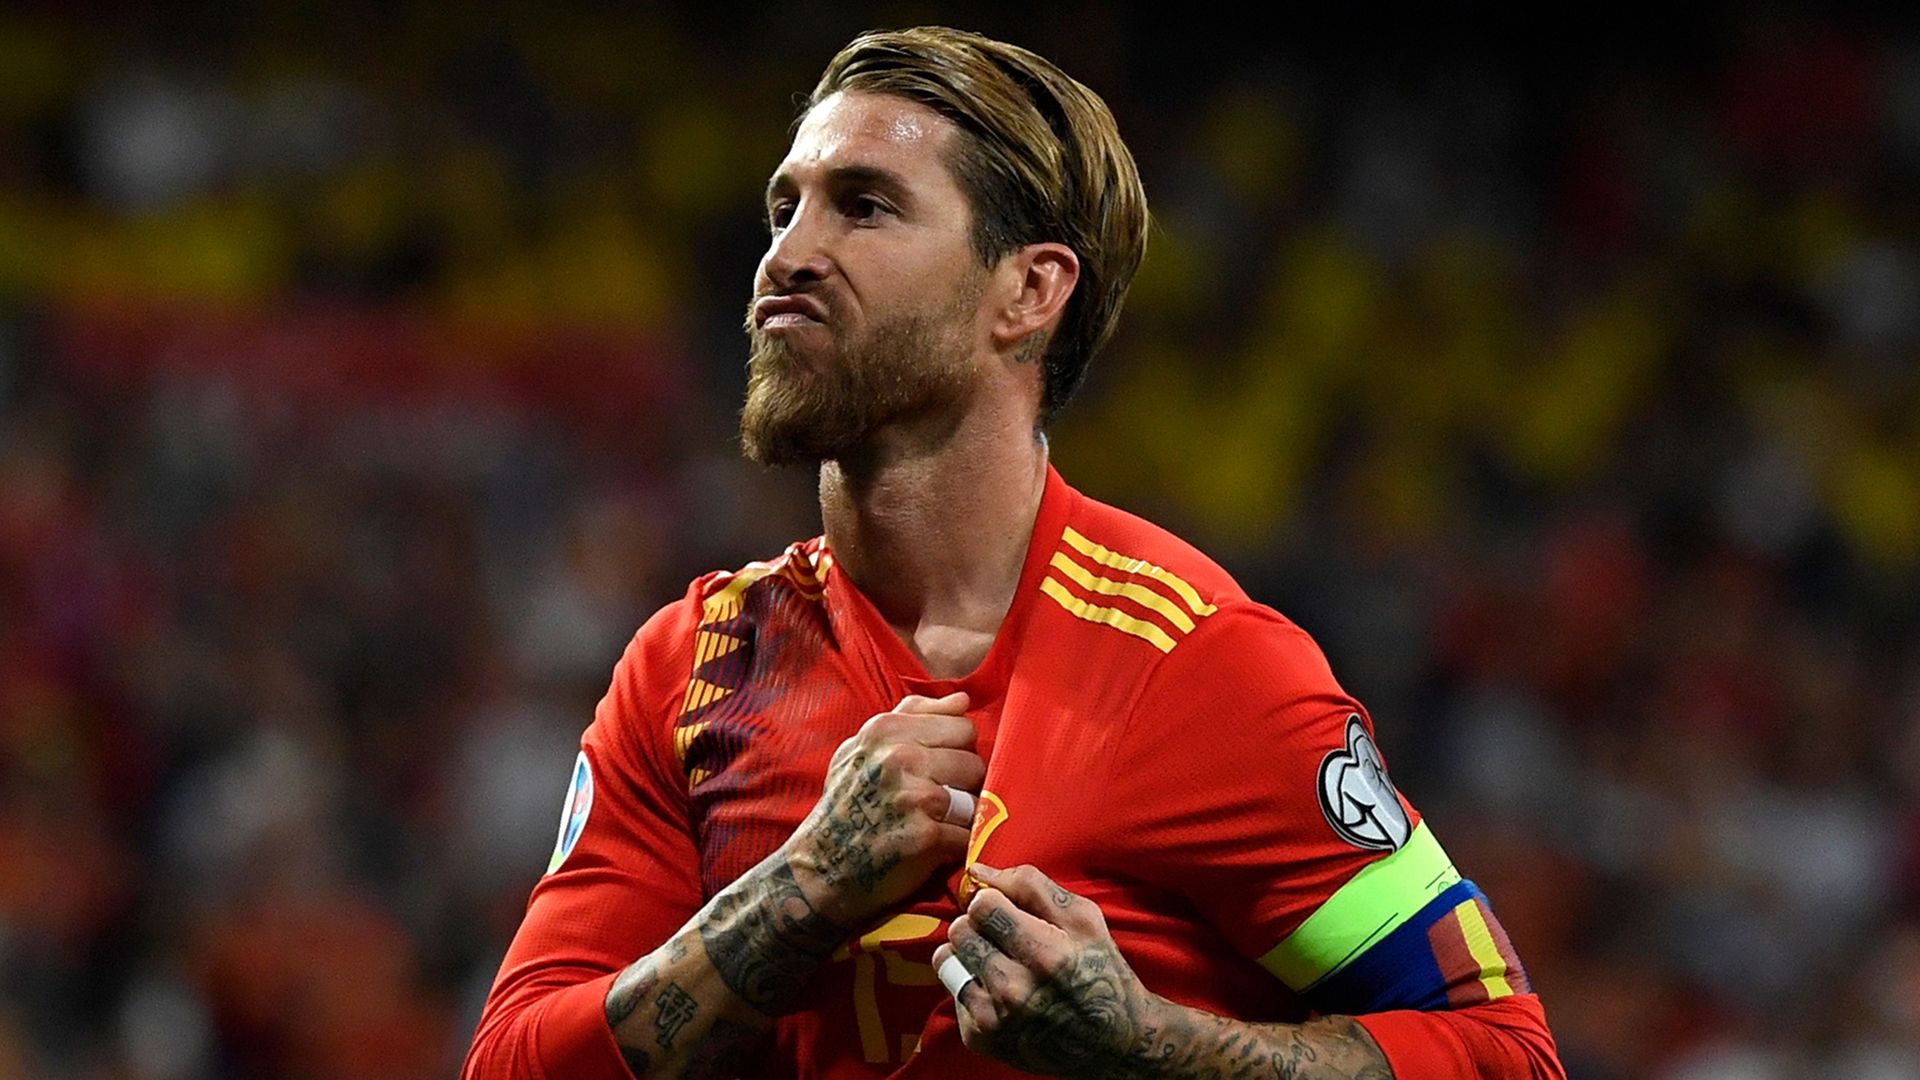 Ramos Breaks Casillas's Record To Become Spain's Most Capped Player Ever